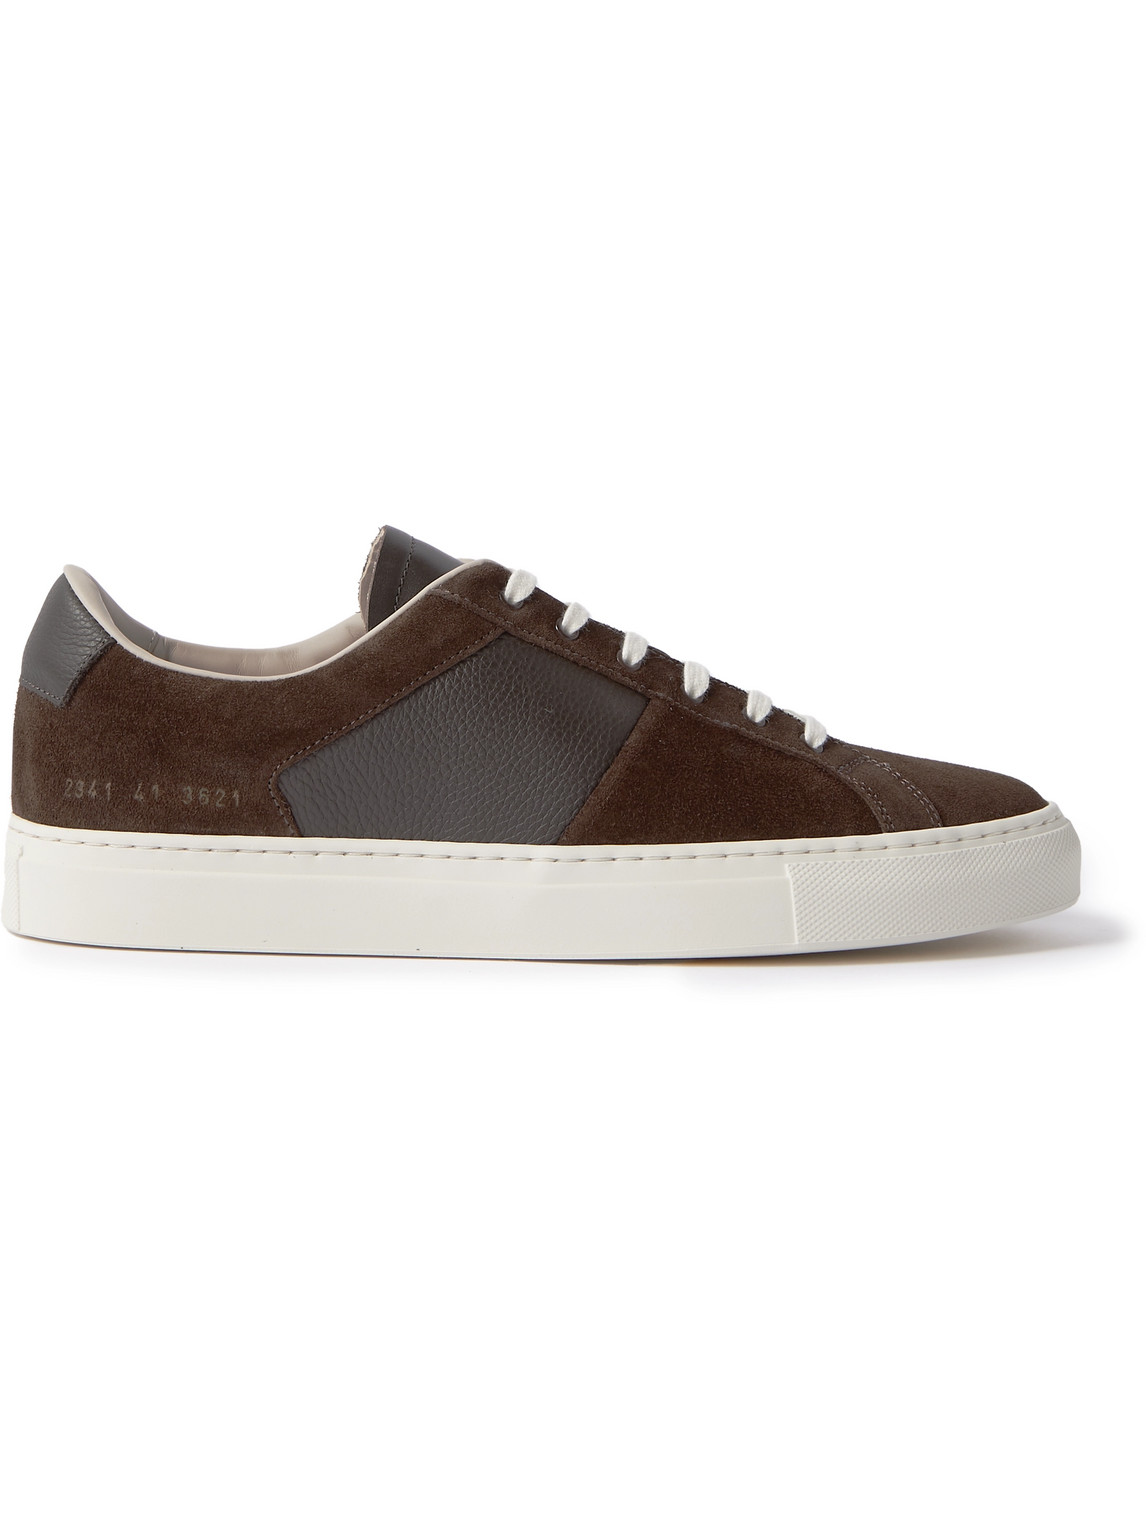 COMMON PROJECTS WINTER ACHILLES SUEDE AND FULL-GRAIN LEATHER SNEAKERS